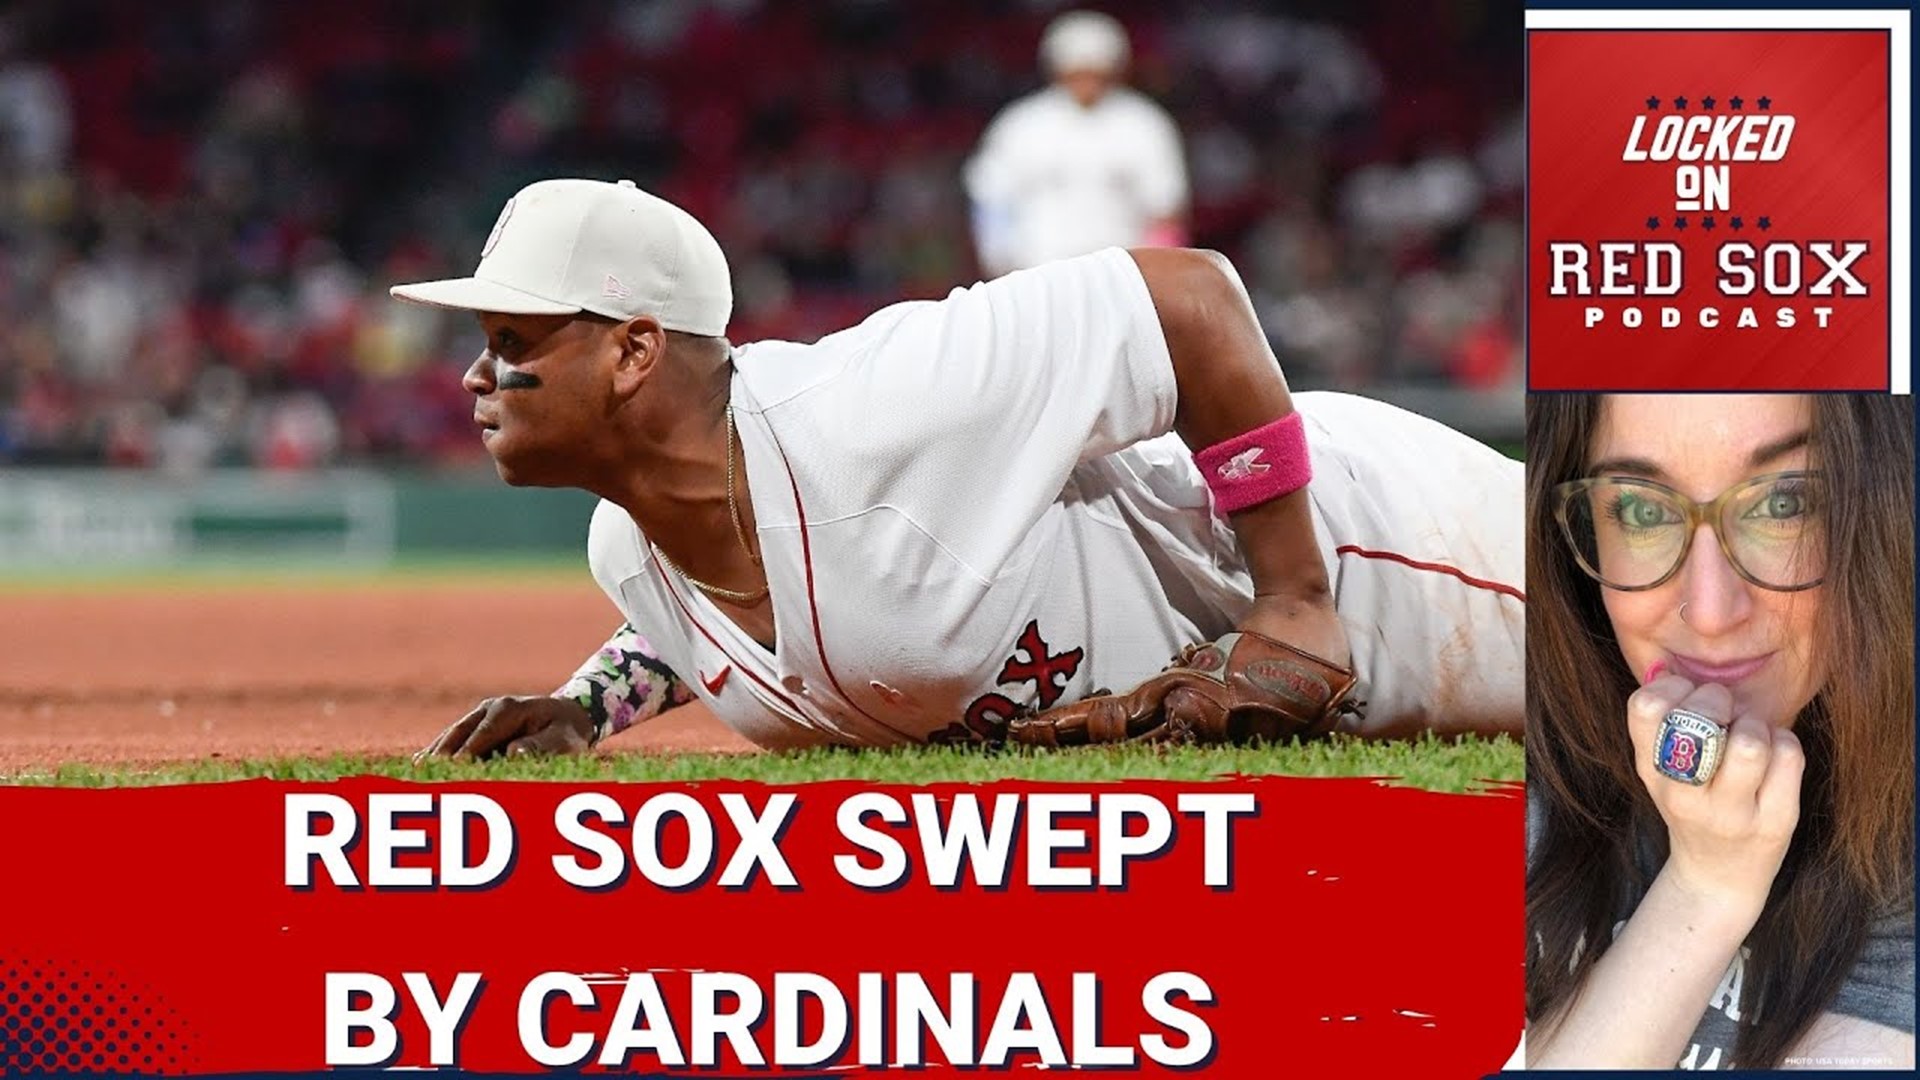 It was an ugly weekend at Fenway Park as the Boston Red Sox were swept by the St. Louis Cardinals in a three-game set.